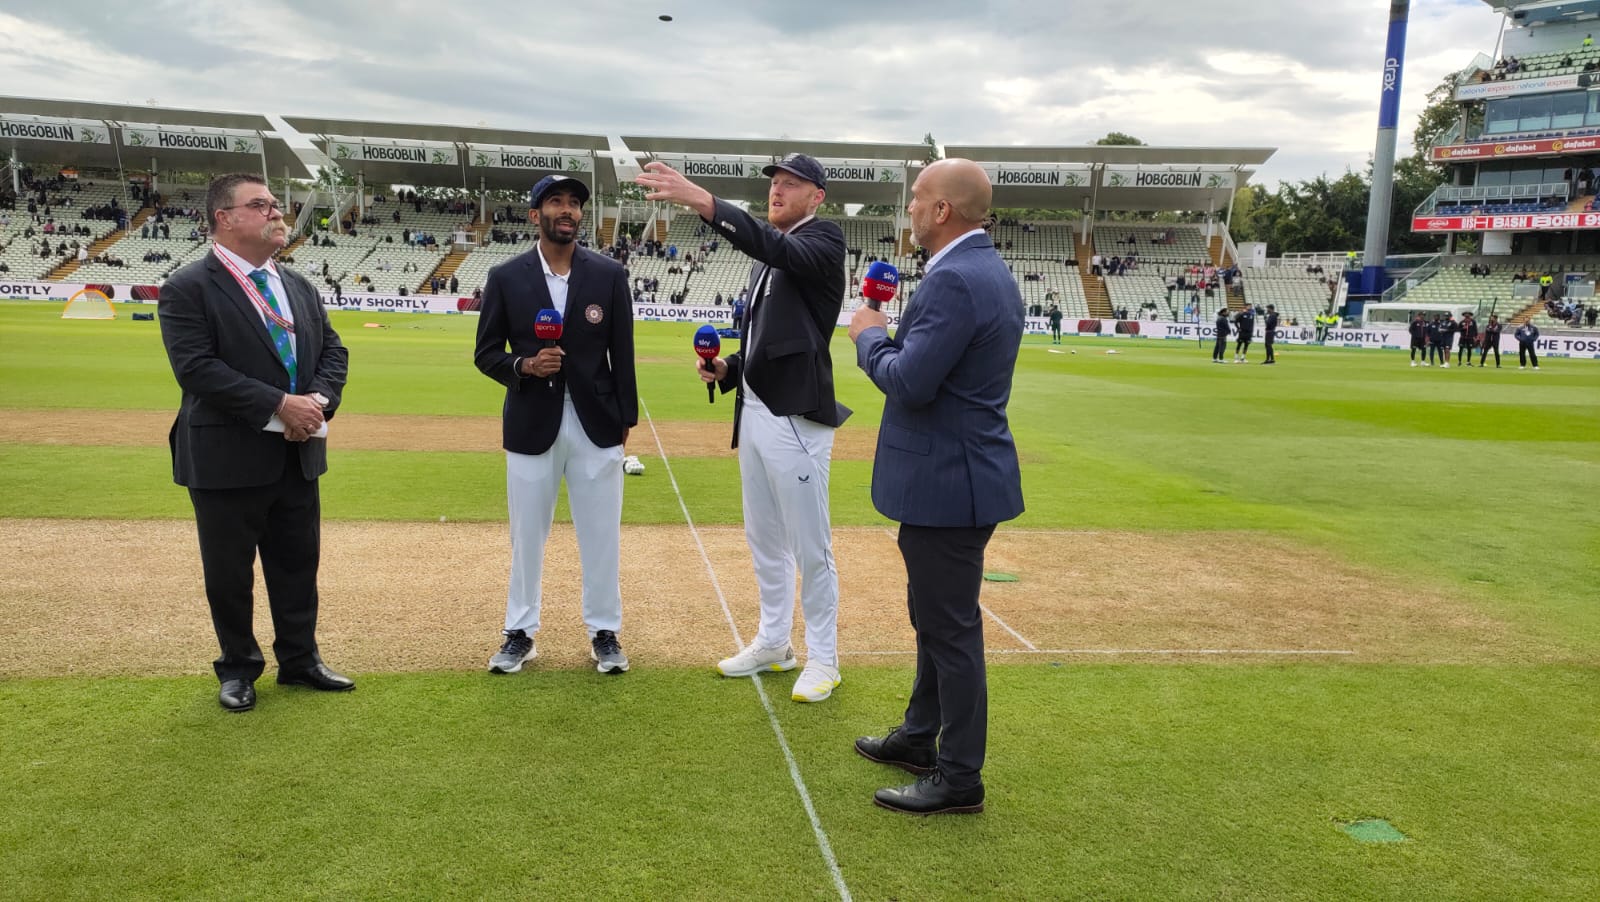 Watch: India skipper Bumrah corrects former cricketer at toss vs England